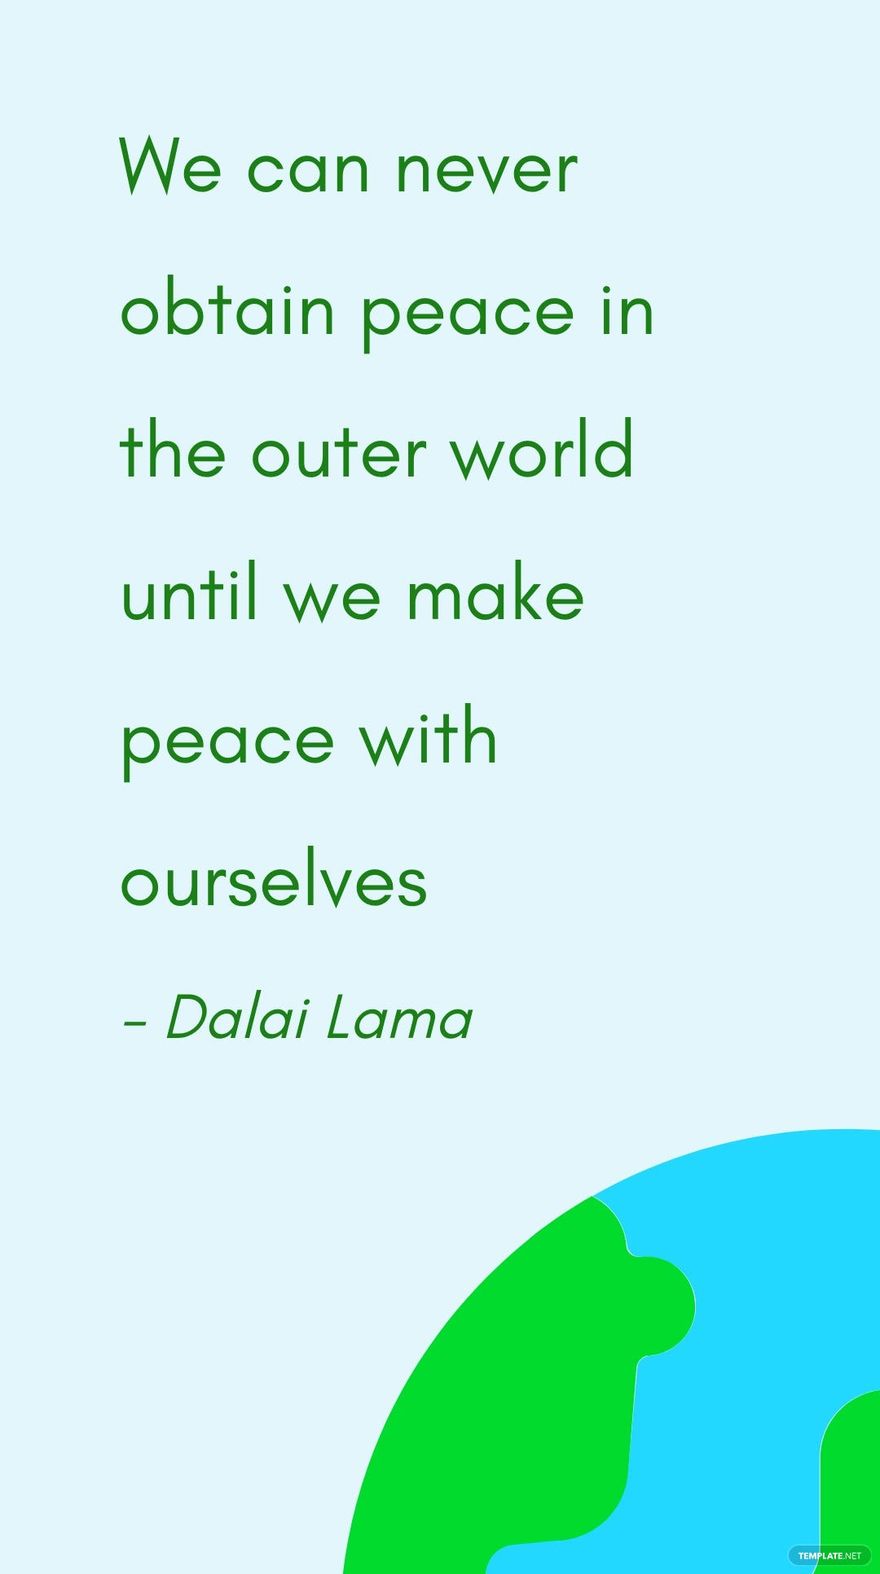 Free Dalai Lama - We can never obtain peace in the outer world until we make peace with ourselves in JPG